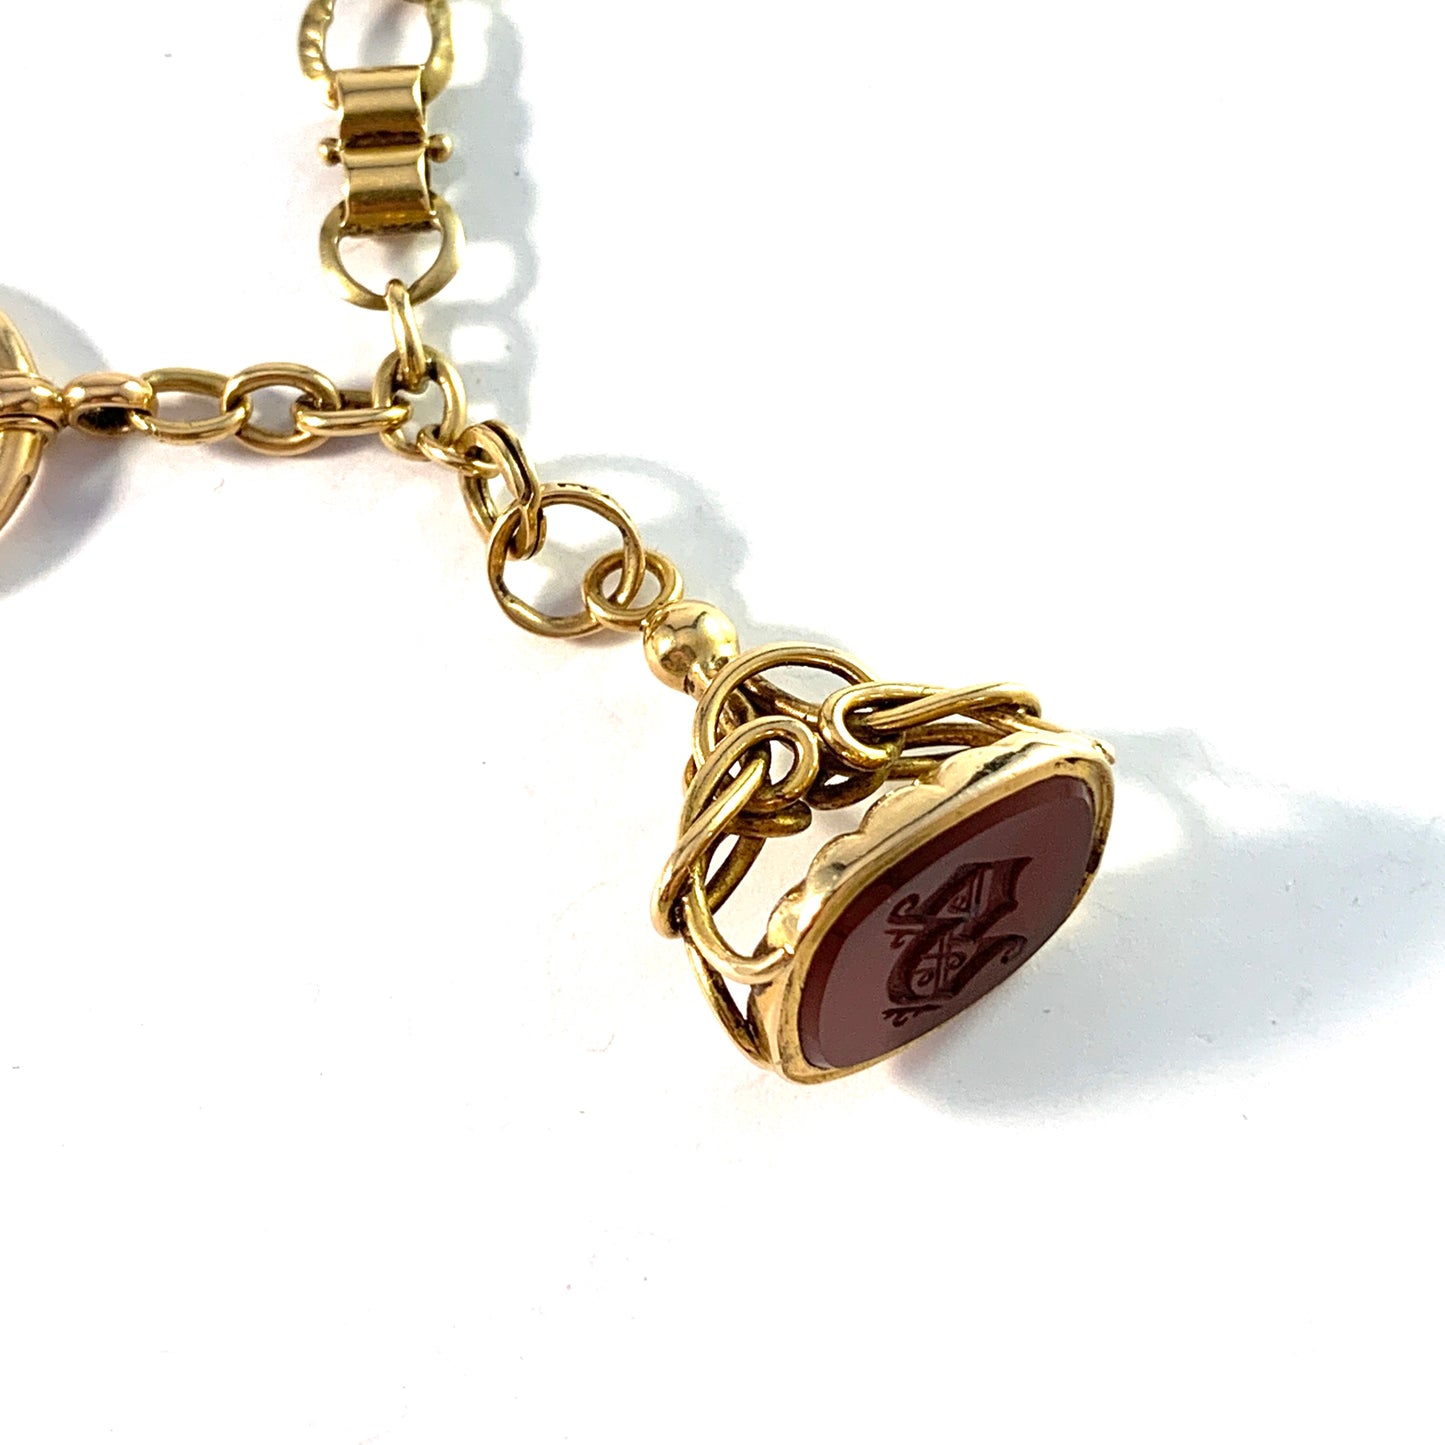 E Cederin, Sweden year 1912. Antique 18k Gold Watch Chain Wax Seal Fob. (Necklace Length)